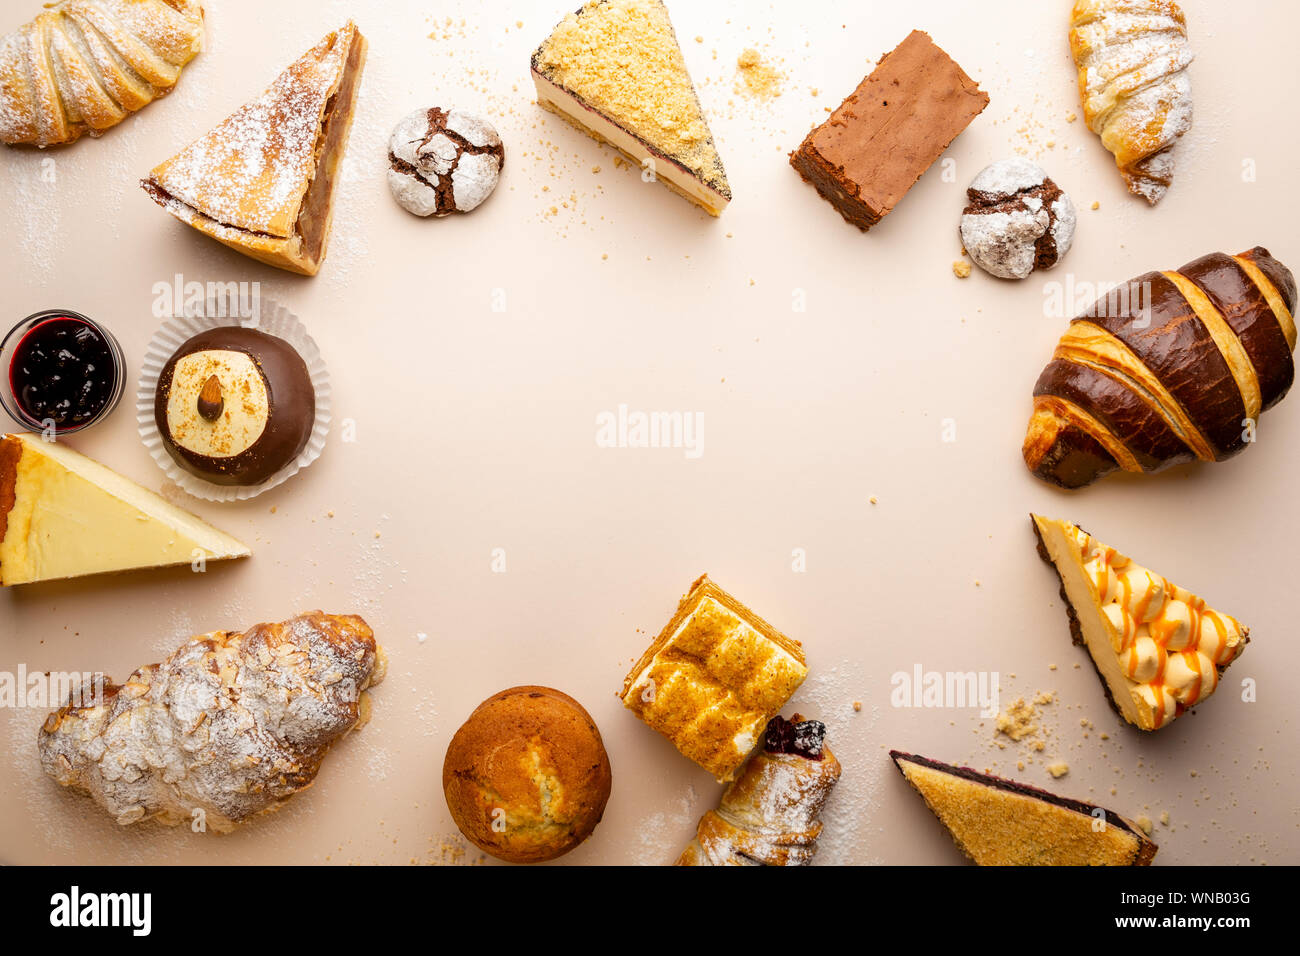 Pastry baking items, cake and cookies top view Stock Photo